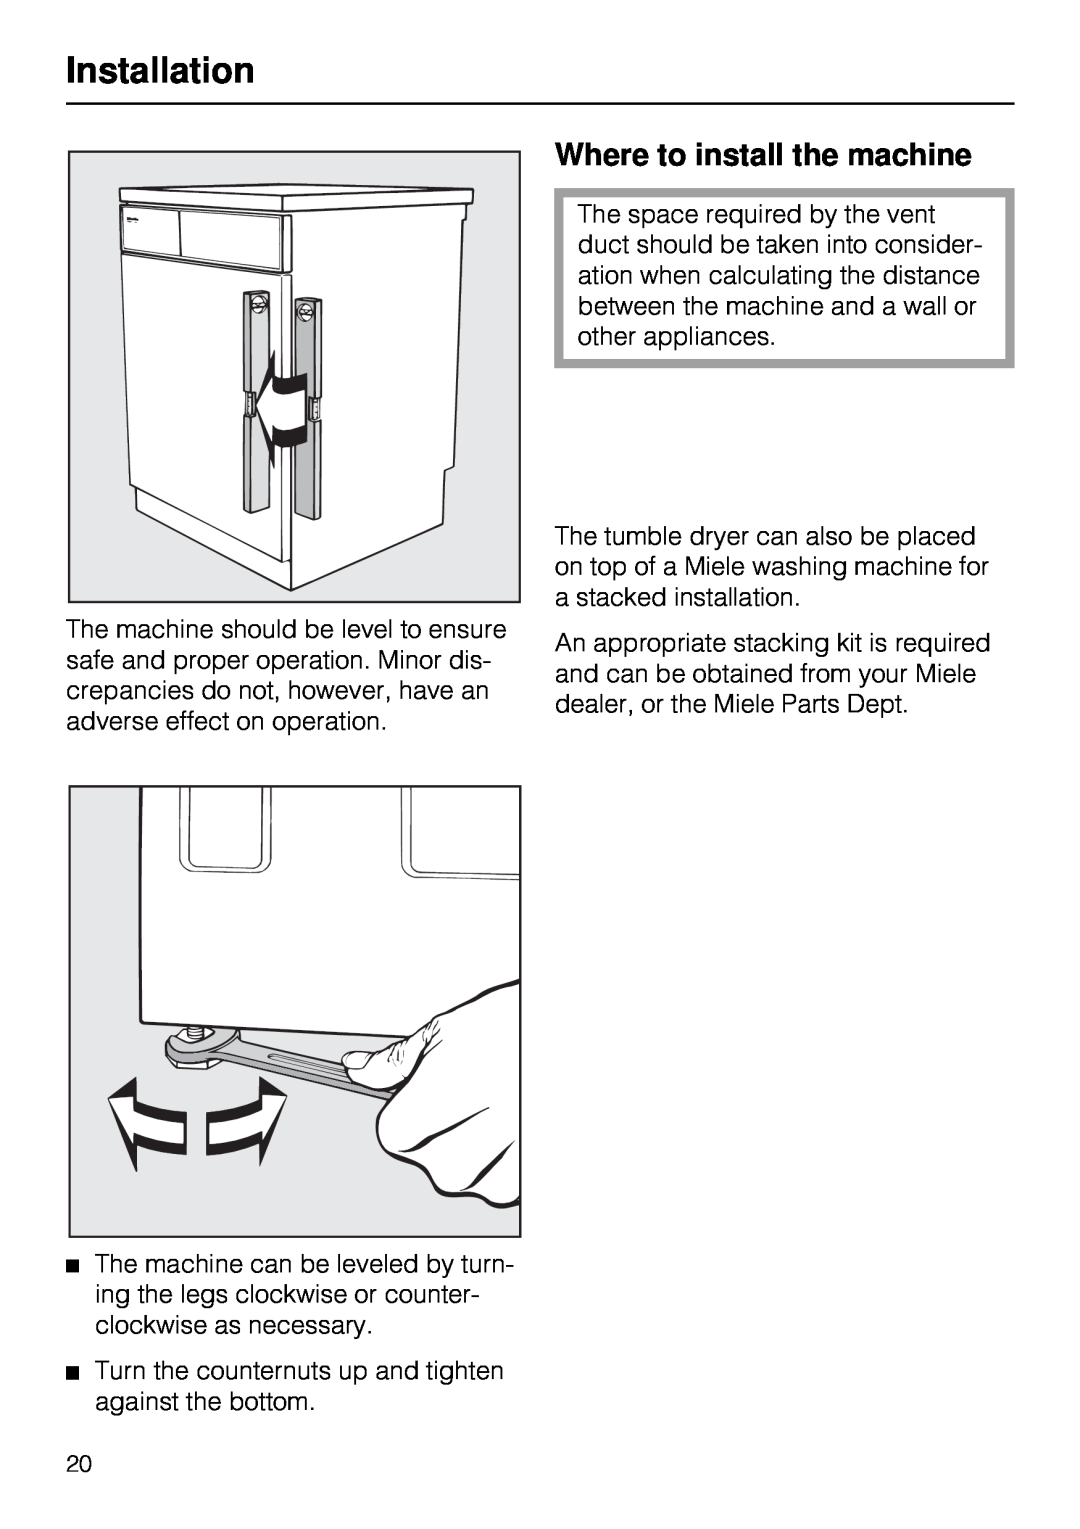 Miele T 1515 operating instructions Installation, Where to install the machine 